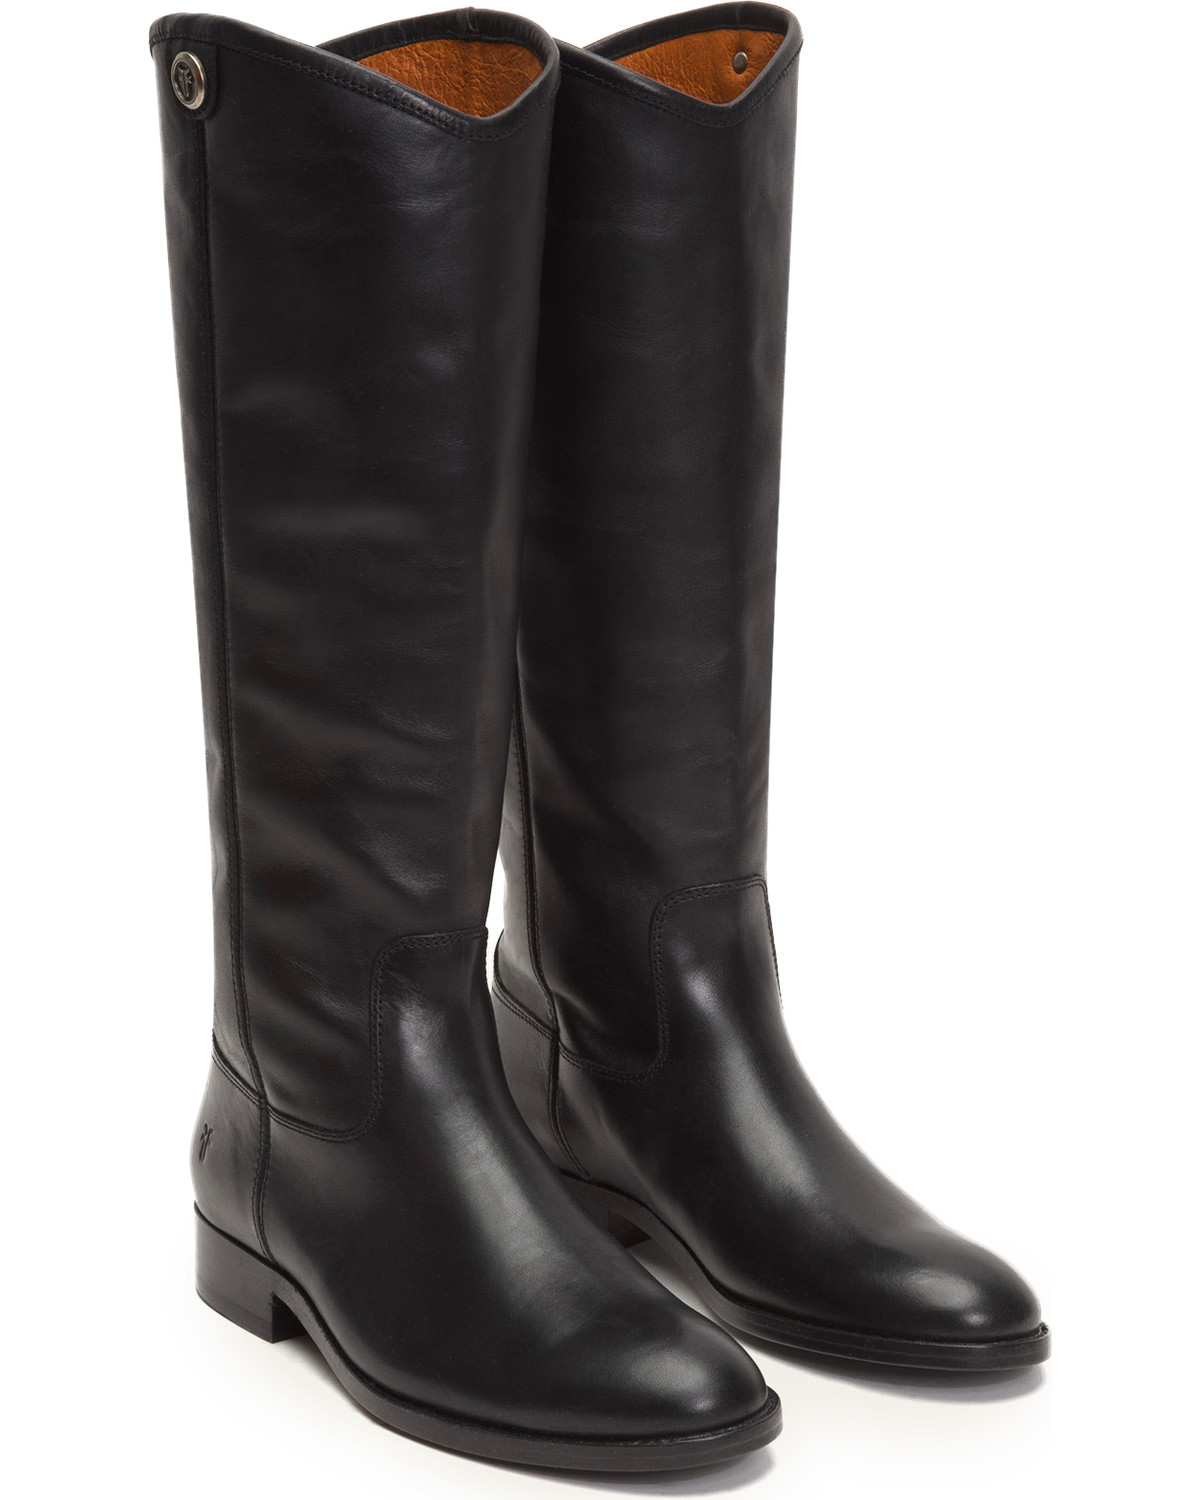 Tall Boots - Round Toe | Sheplers